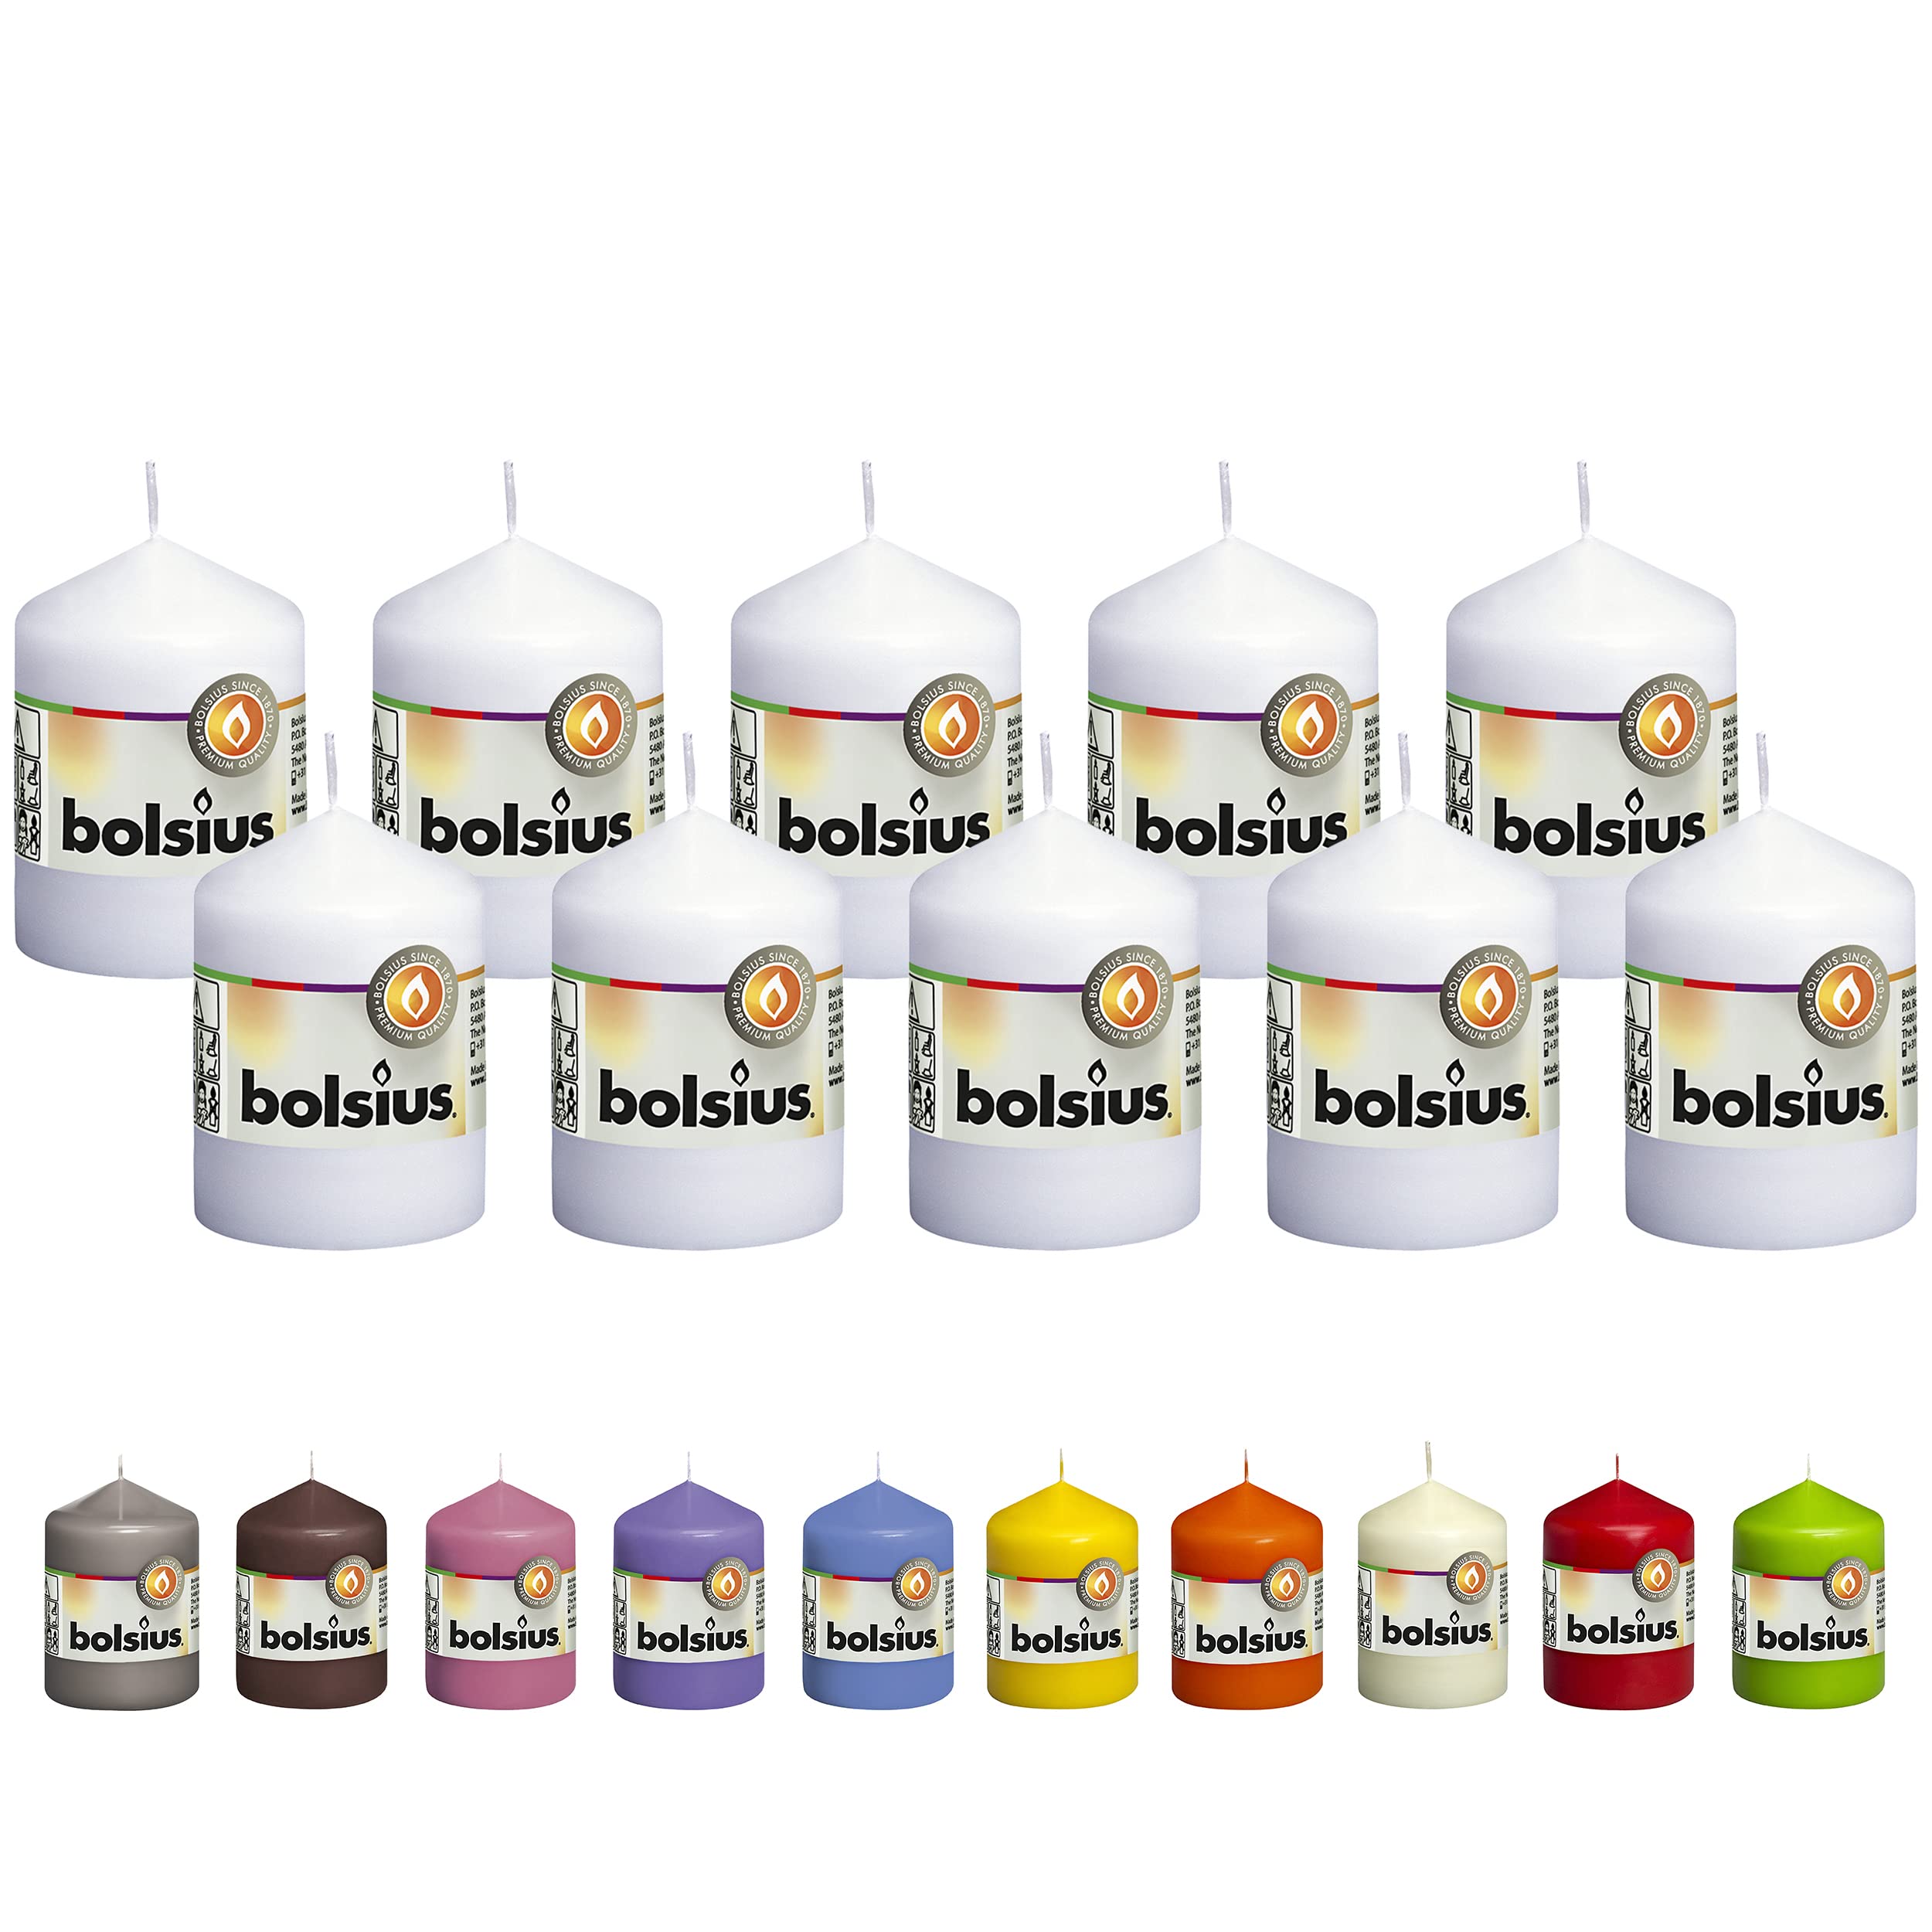 BOLSIUS 10 Pillar Candles - 2.25 x 3.25 Inches - Premium European Quality - Individually Wrapped  - Like New